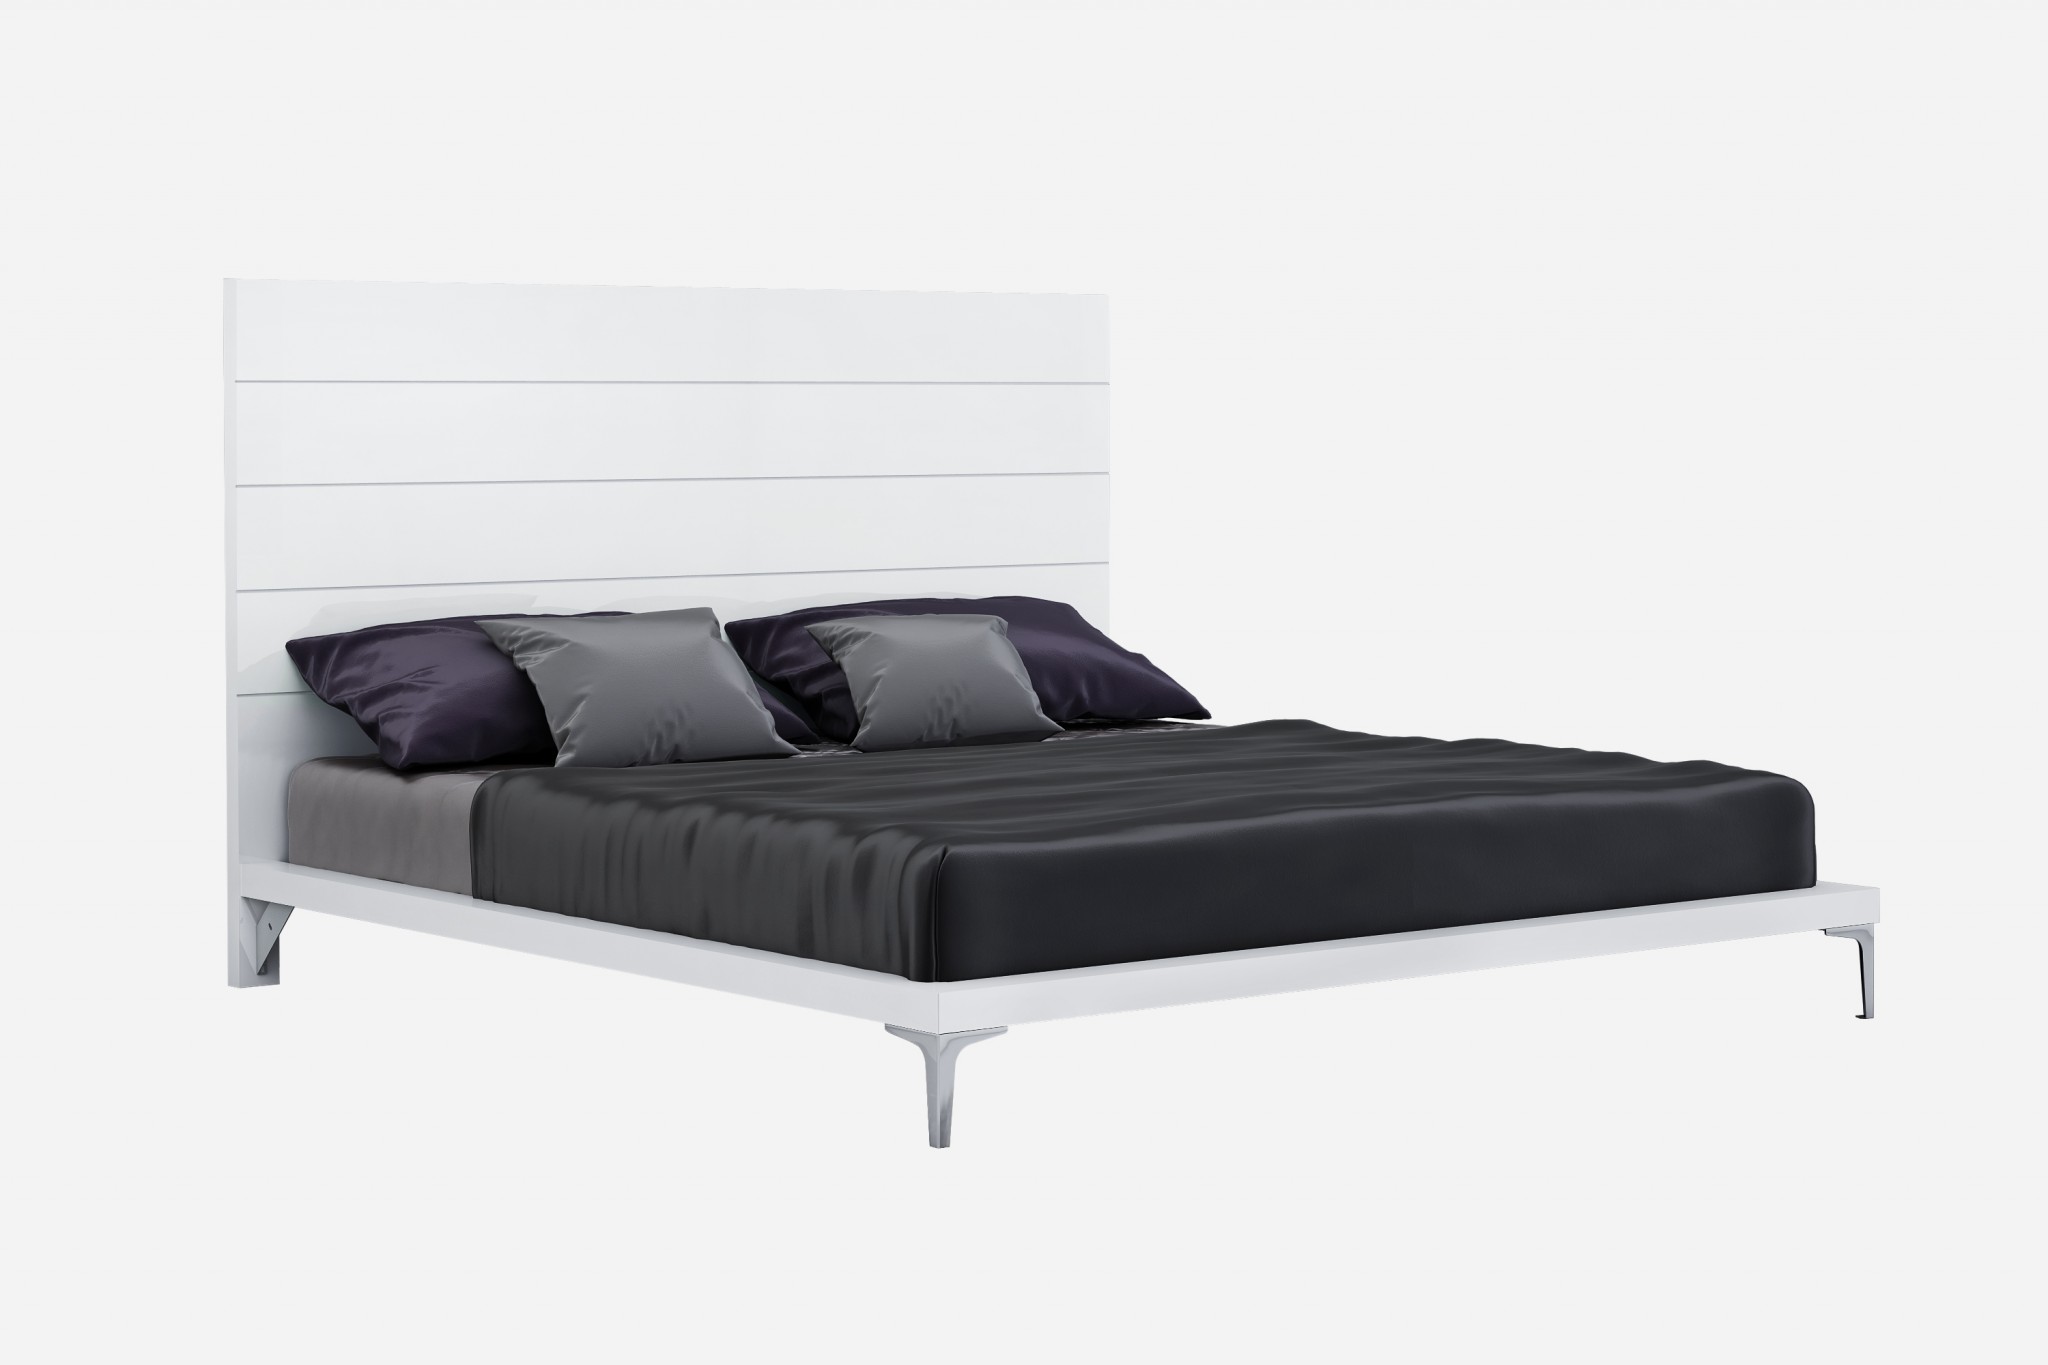 76" X 80" X 51" White Stainless Steel King Bed